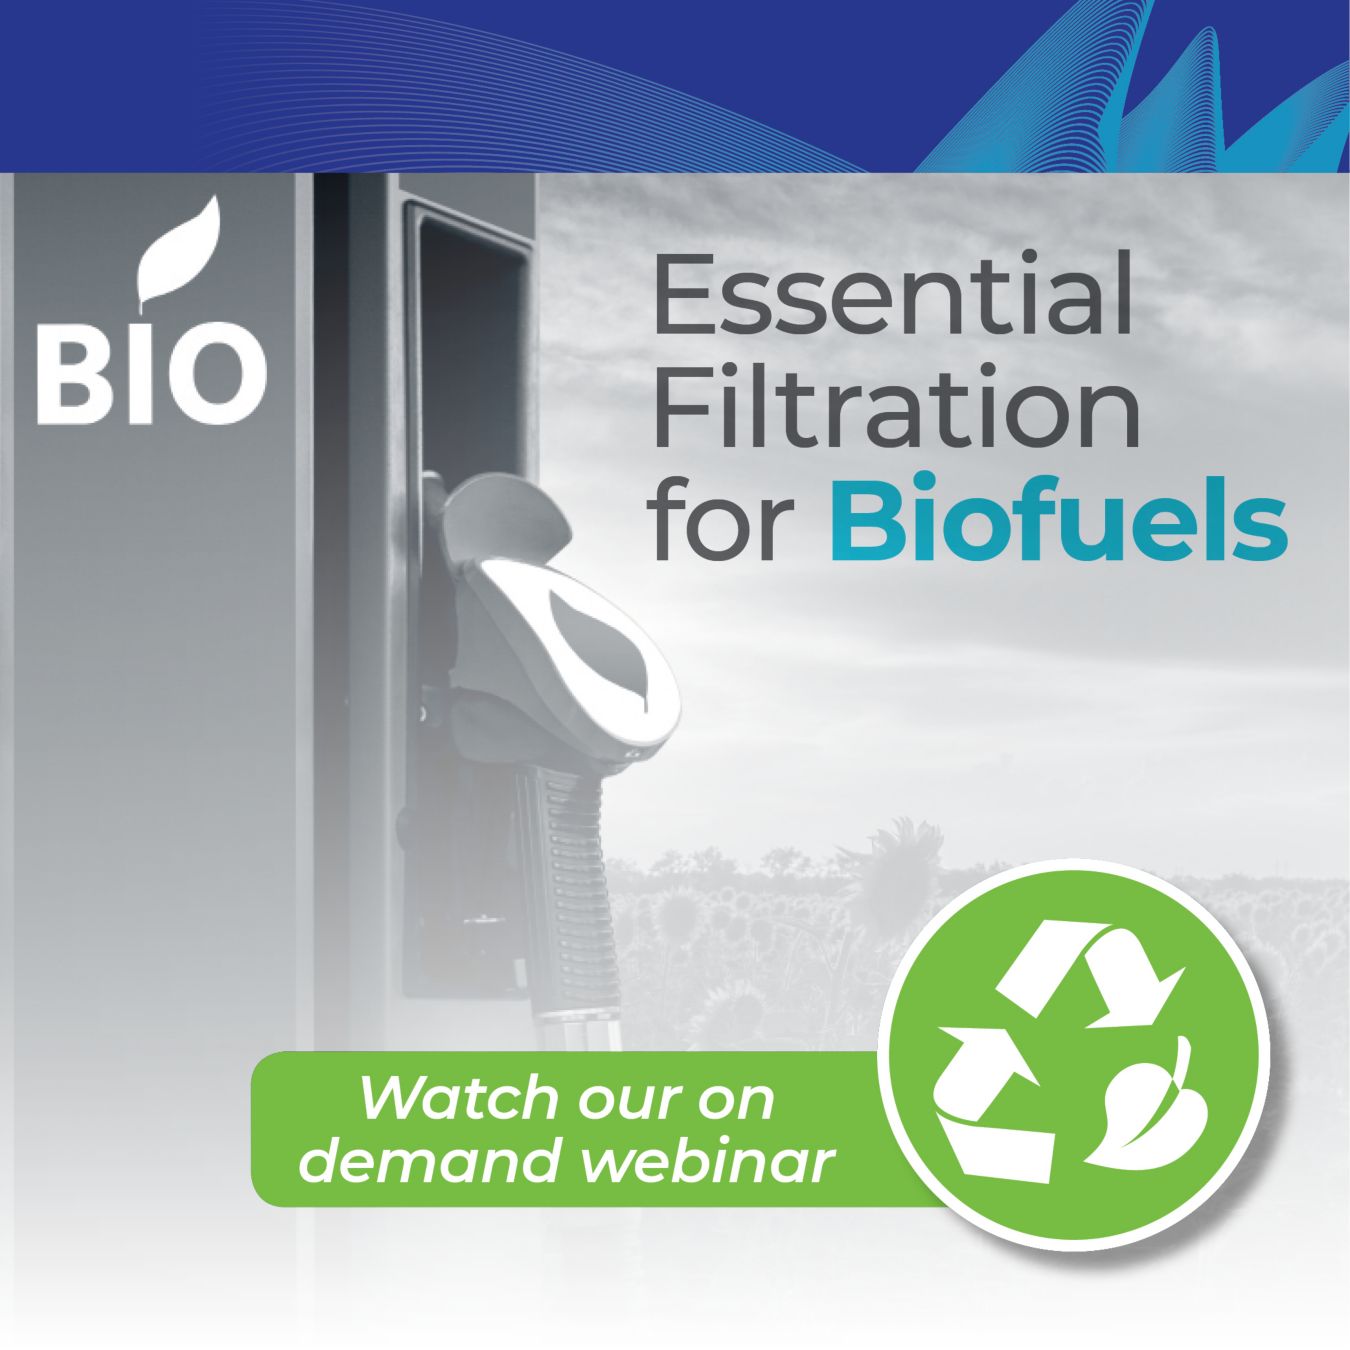 Essential Filtration for Biofuels